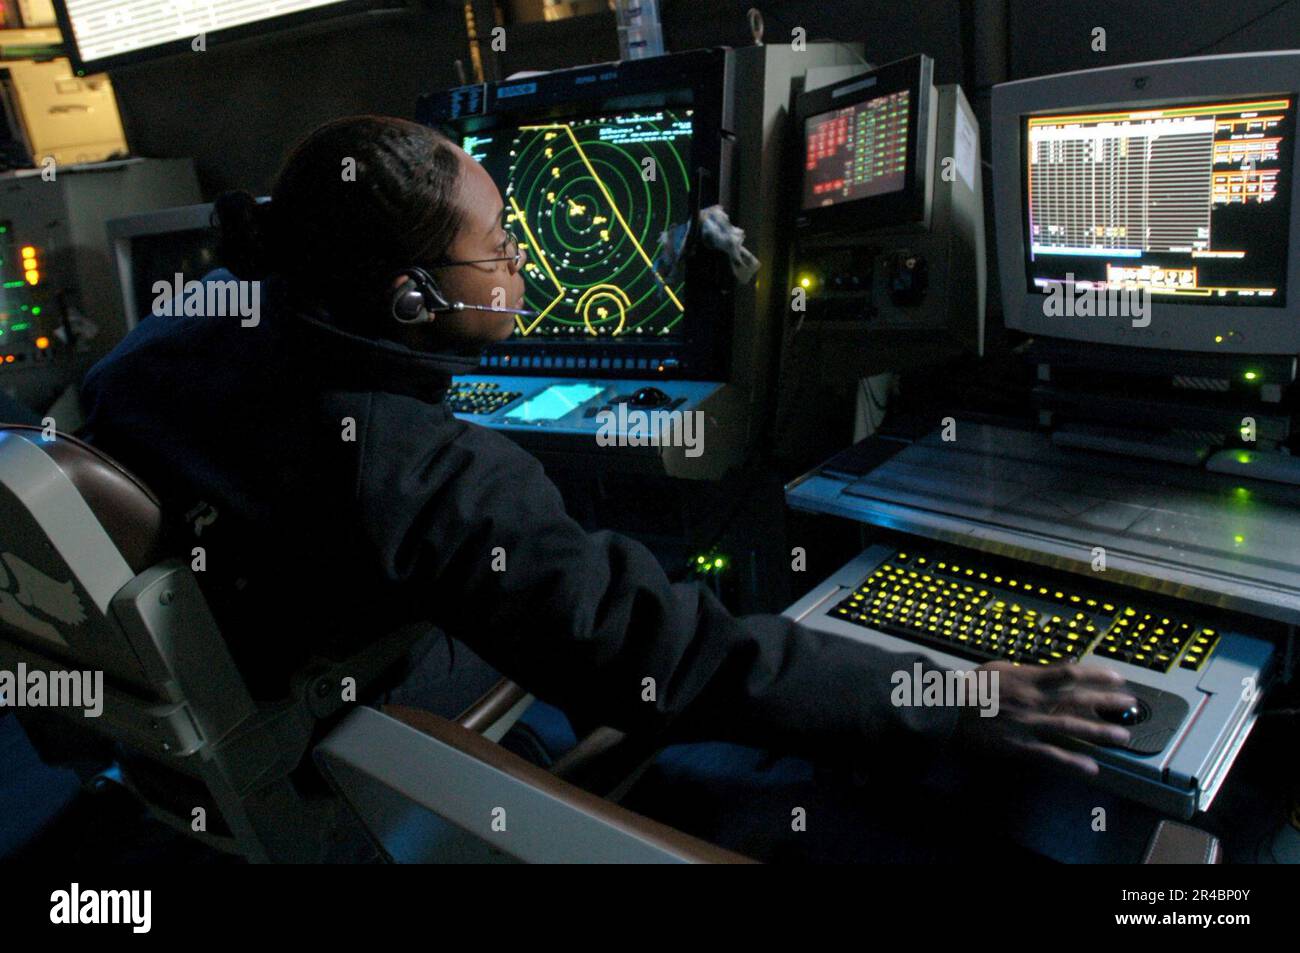 US Navy  Air Traffic Controller 2nd Class Petty Officer monitors both the Approach A and Approach ISIS consoles in the Carrier Air Traffic Control Center (CATCC) aboard USS Theodo. Stock Photo